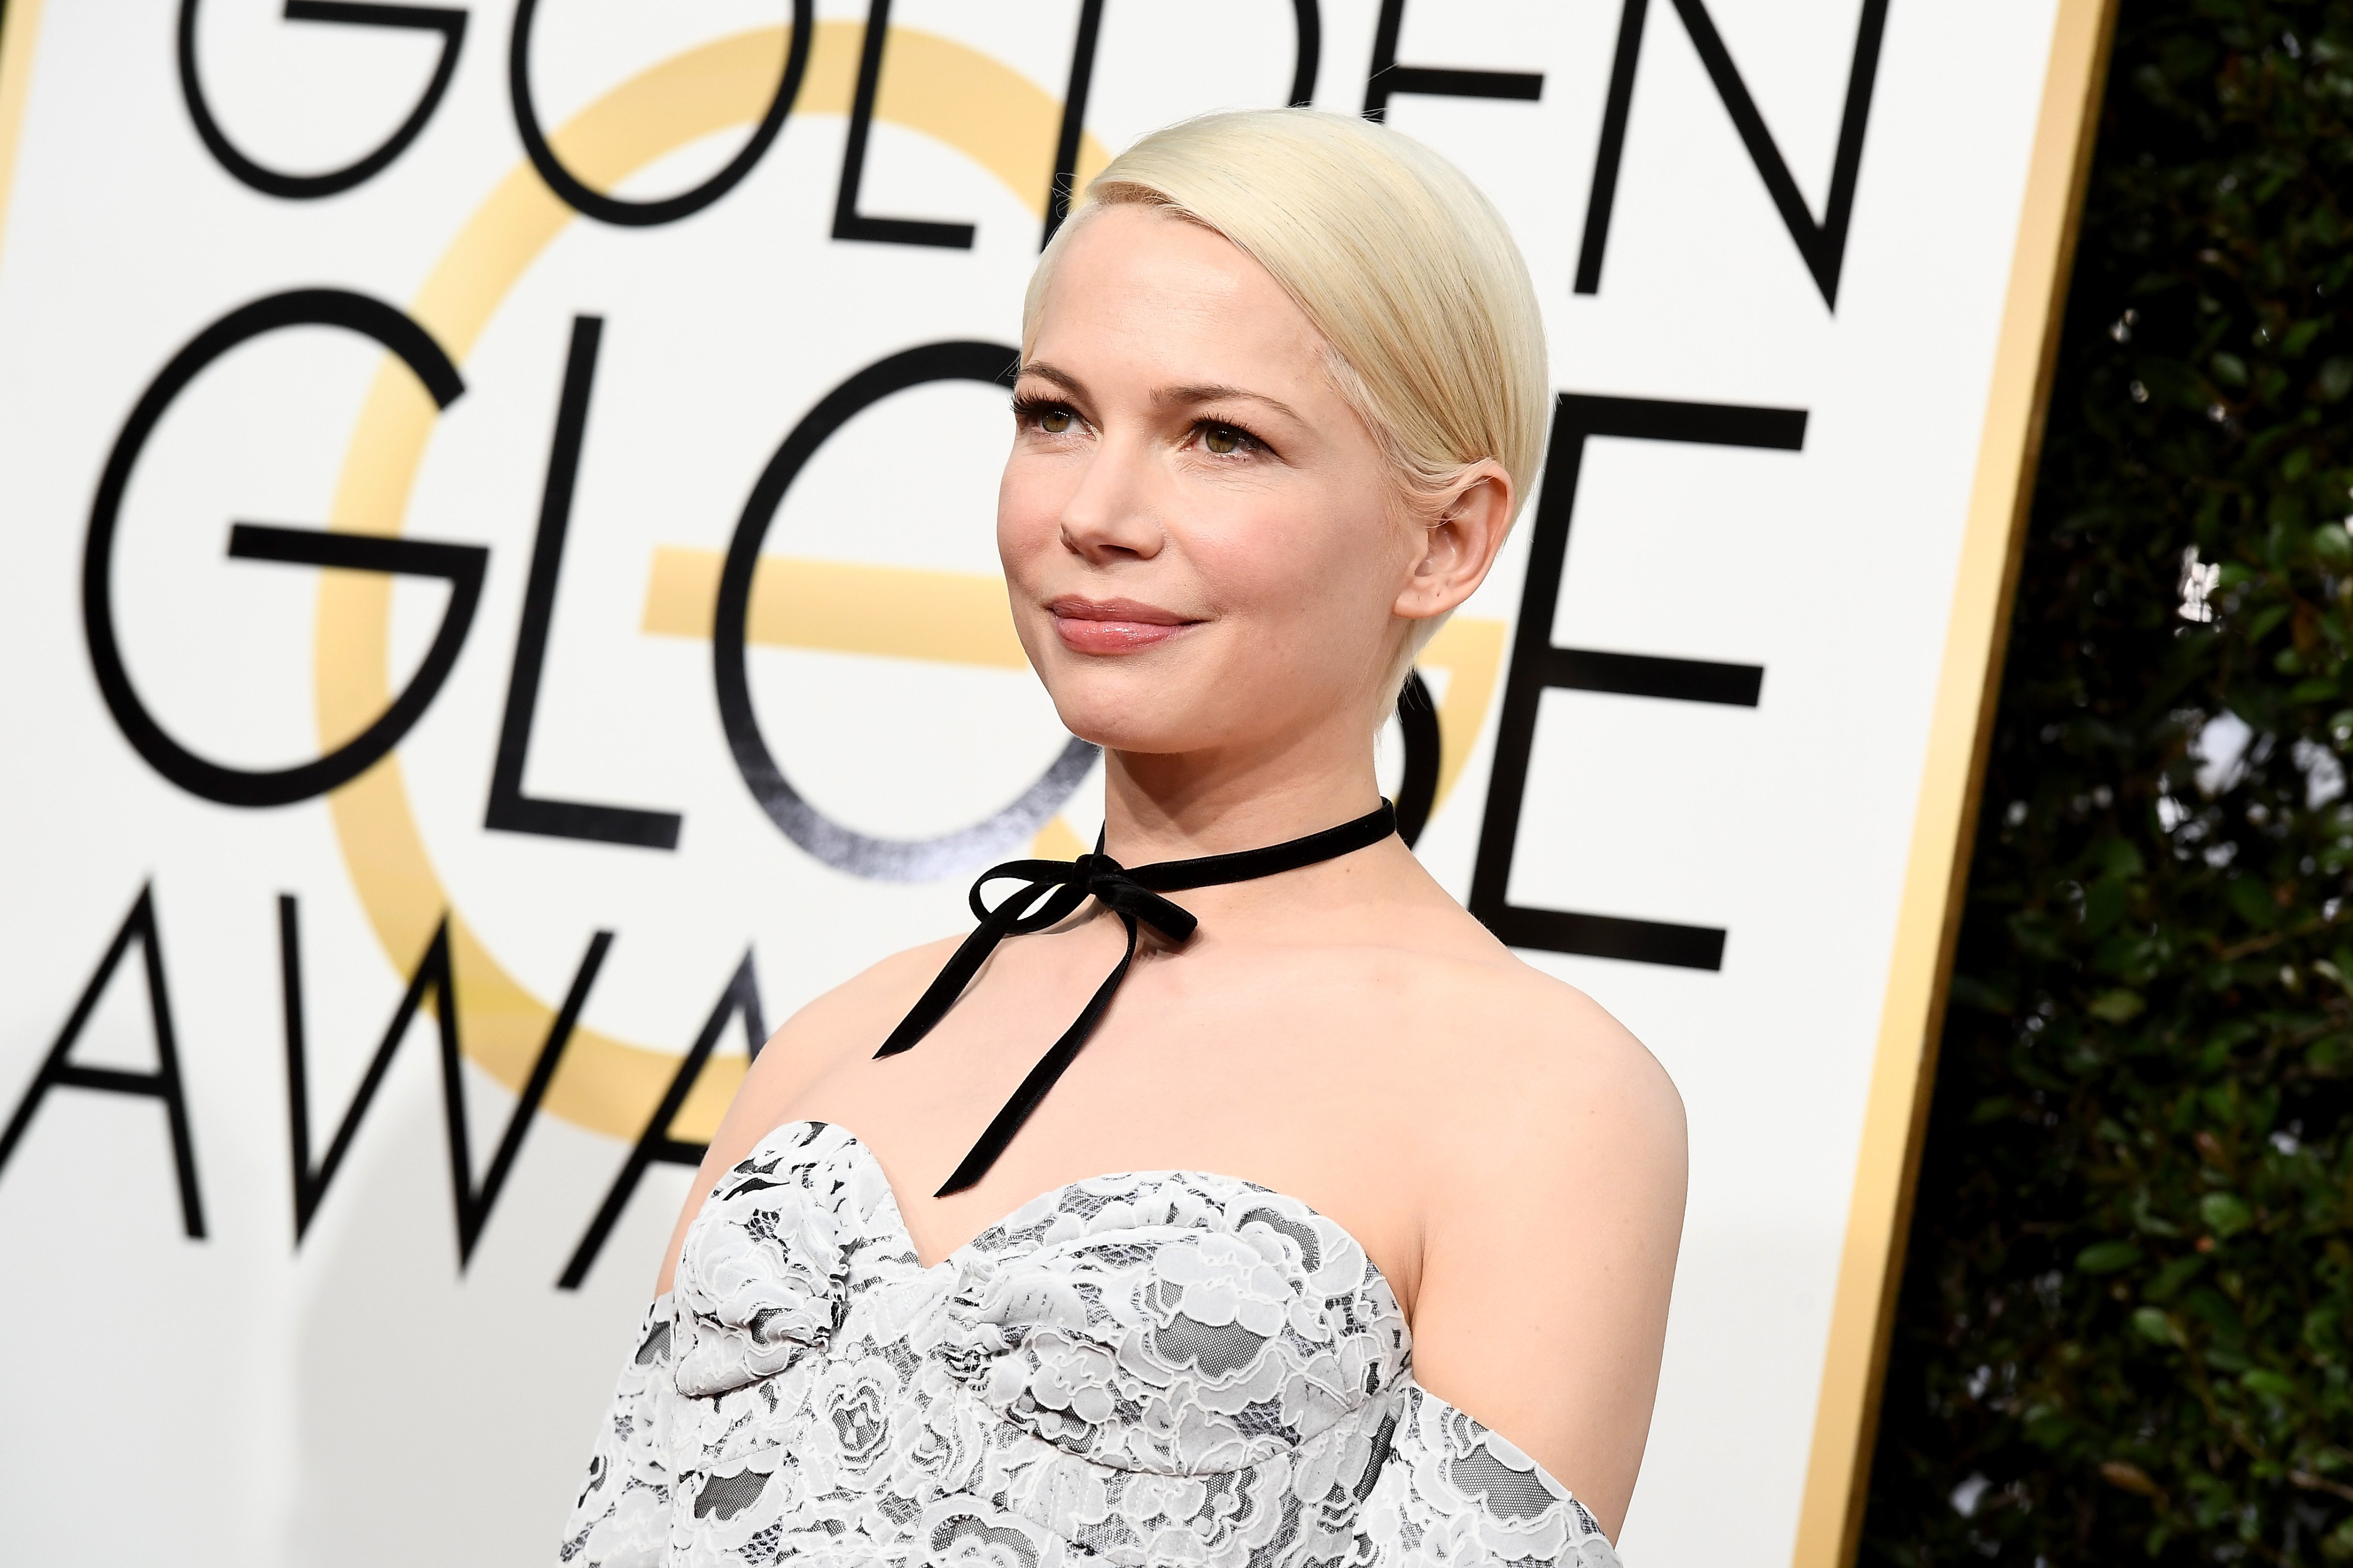 BEVERLY HILLS, CA - JANUARY 08:  74th ANNUAL GOLDEN GLOBE AWARDS -- Pictured: Actress Michelle Williams arrives to the 74th Annual Golden Globe Awards held at the Beverly Hilton Hotel on January 8, 2017.  (Photo by Kevork Djansezian/NBC/NBCU Photo Bank via Getty Images) (Kevork Djansezian/NBC—NBCU Photo Bank via Getty Images via Getty Images)